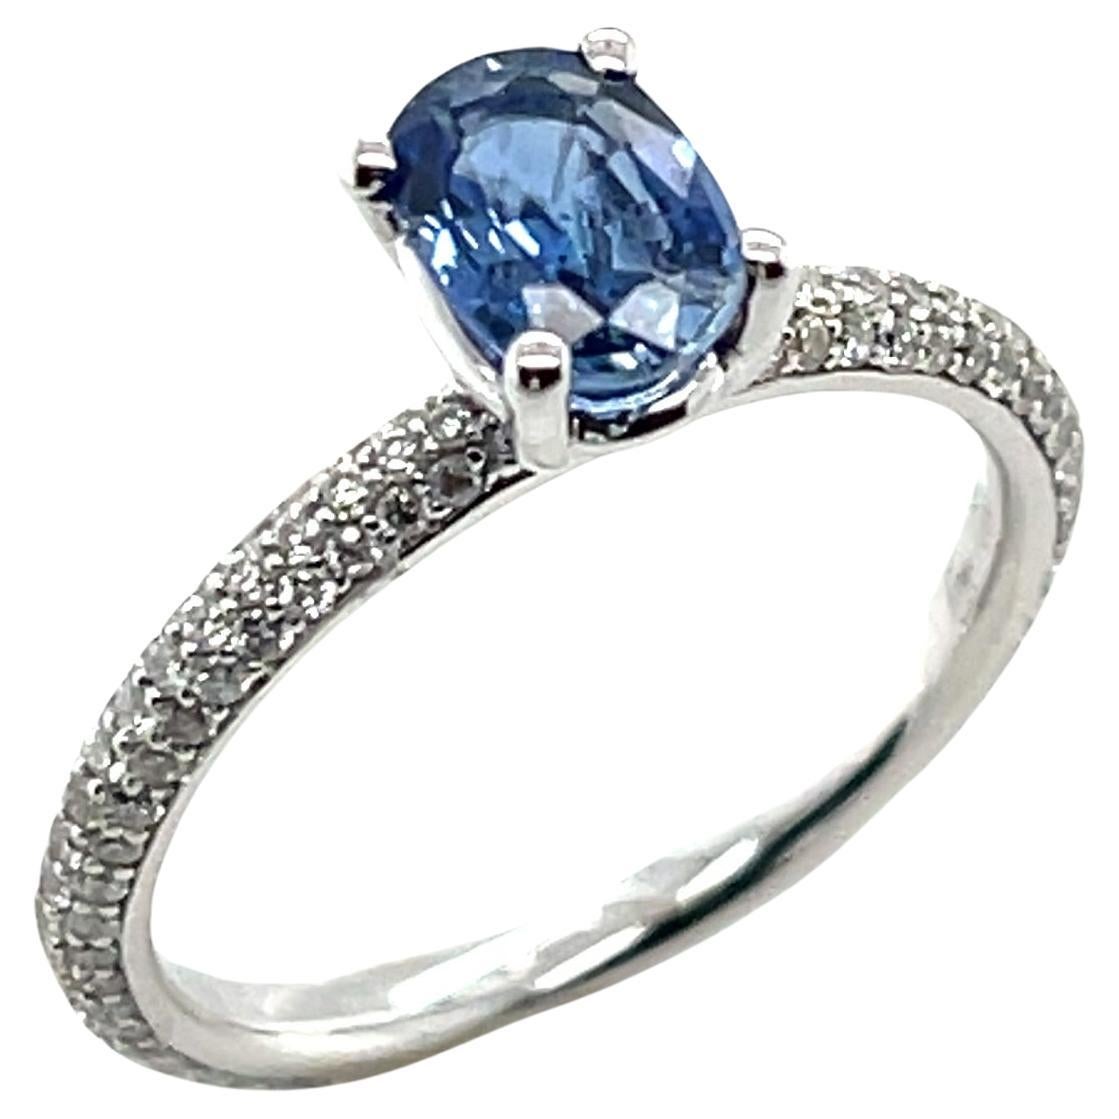 Blue Sapphire and Diamond Pave Engagement Ring in 18k White Gold